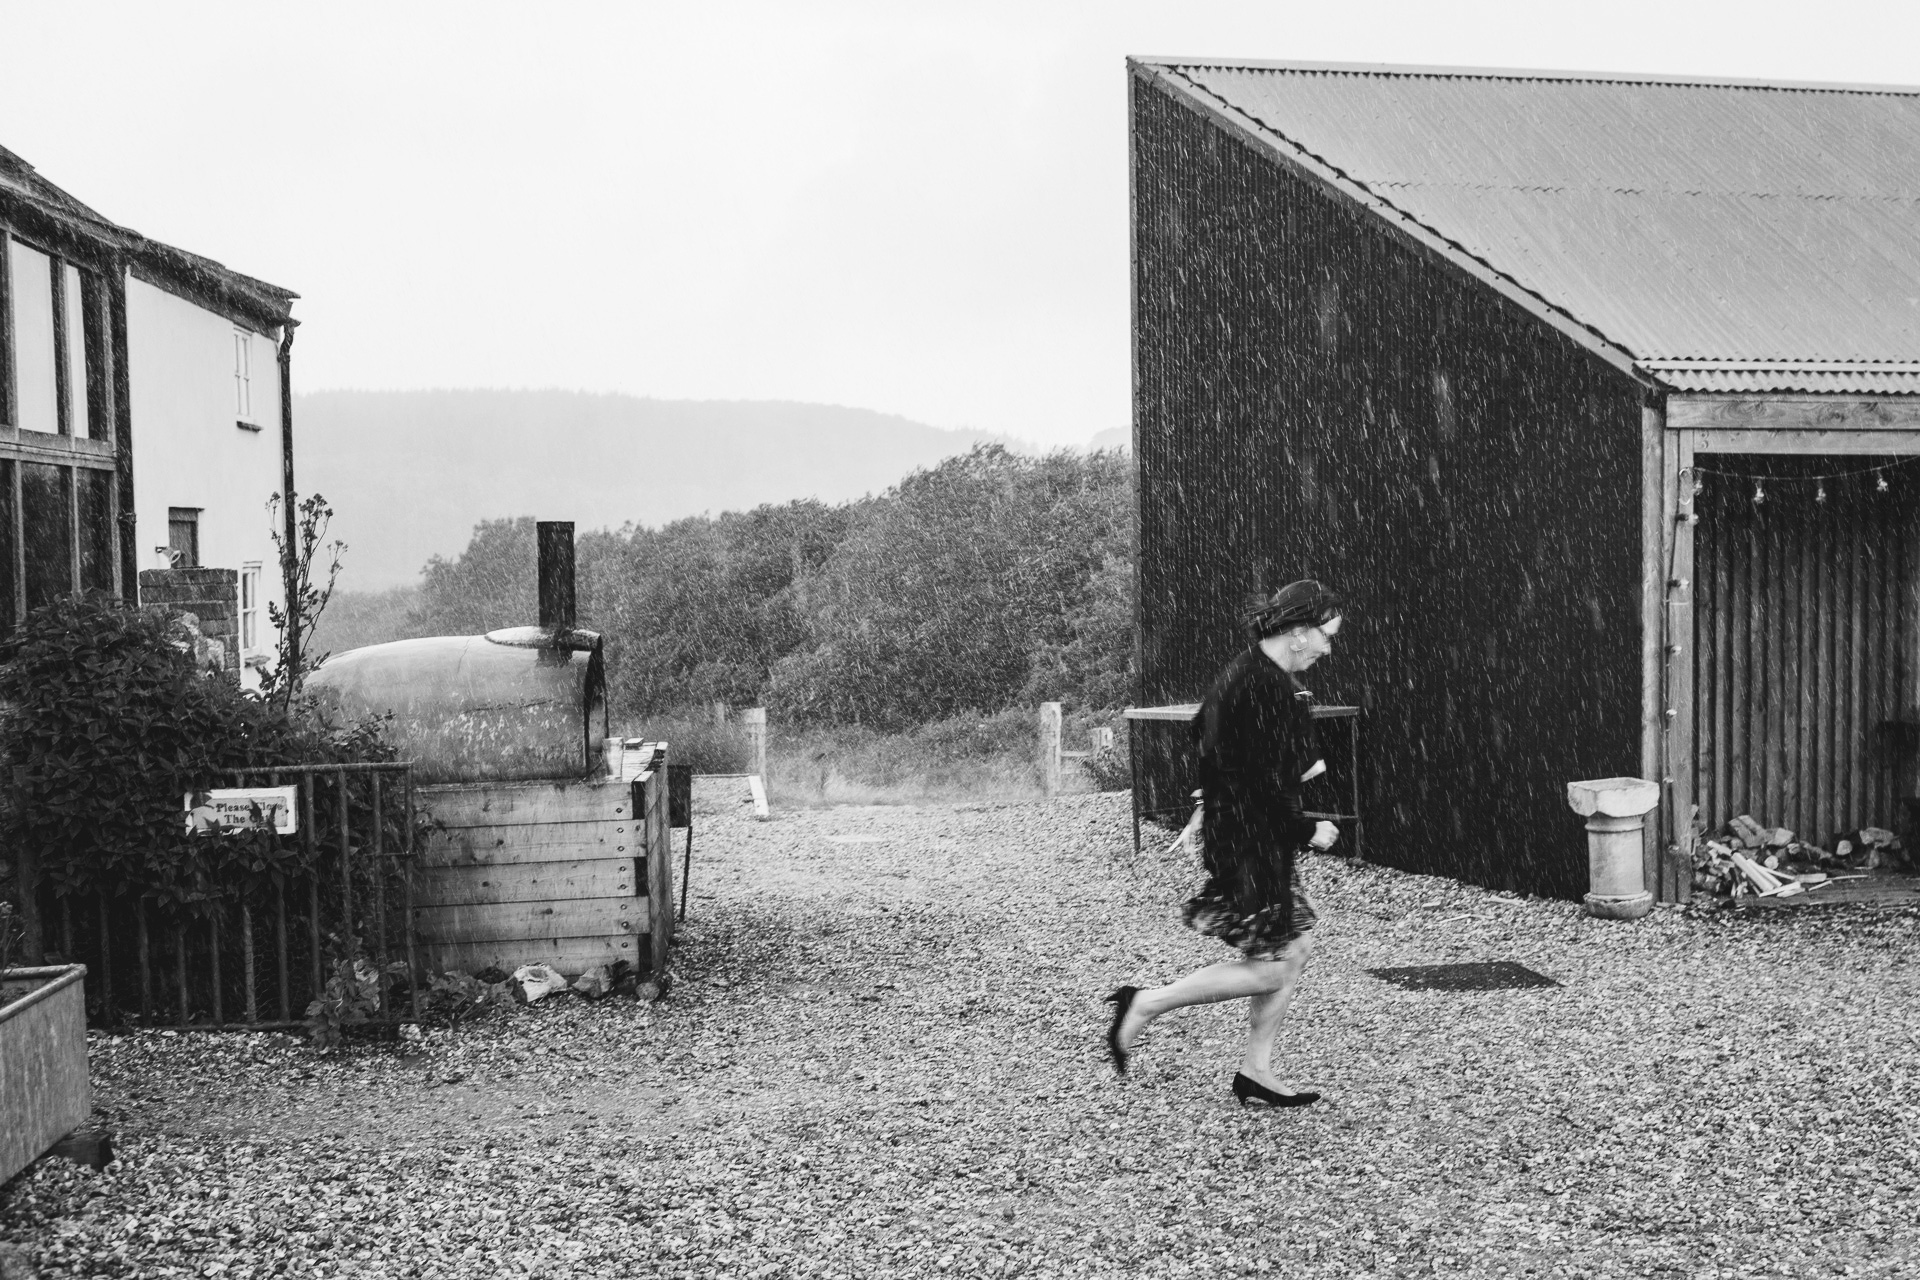 Rain on your wedding day with the celebrant running for cover through rain